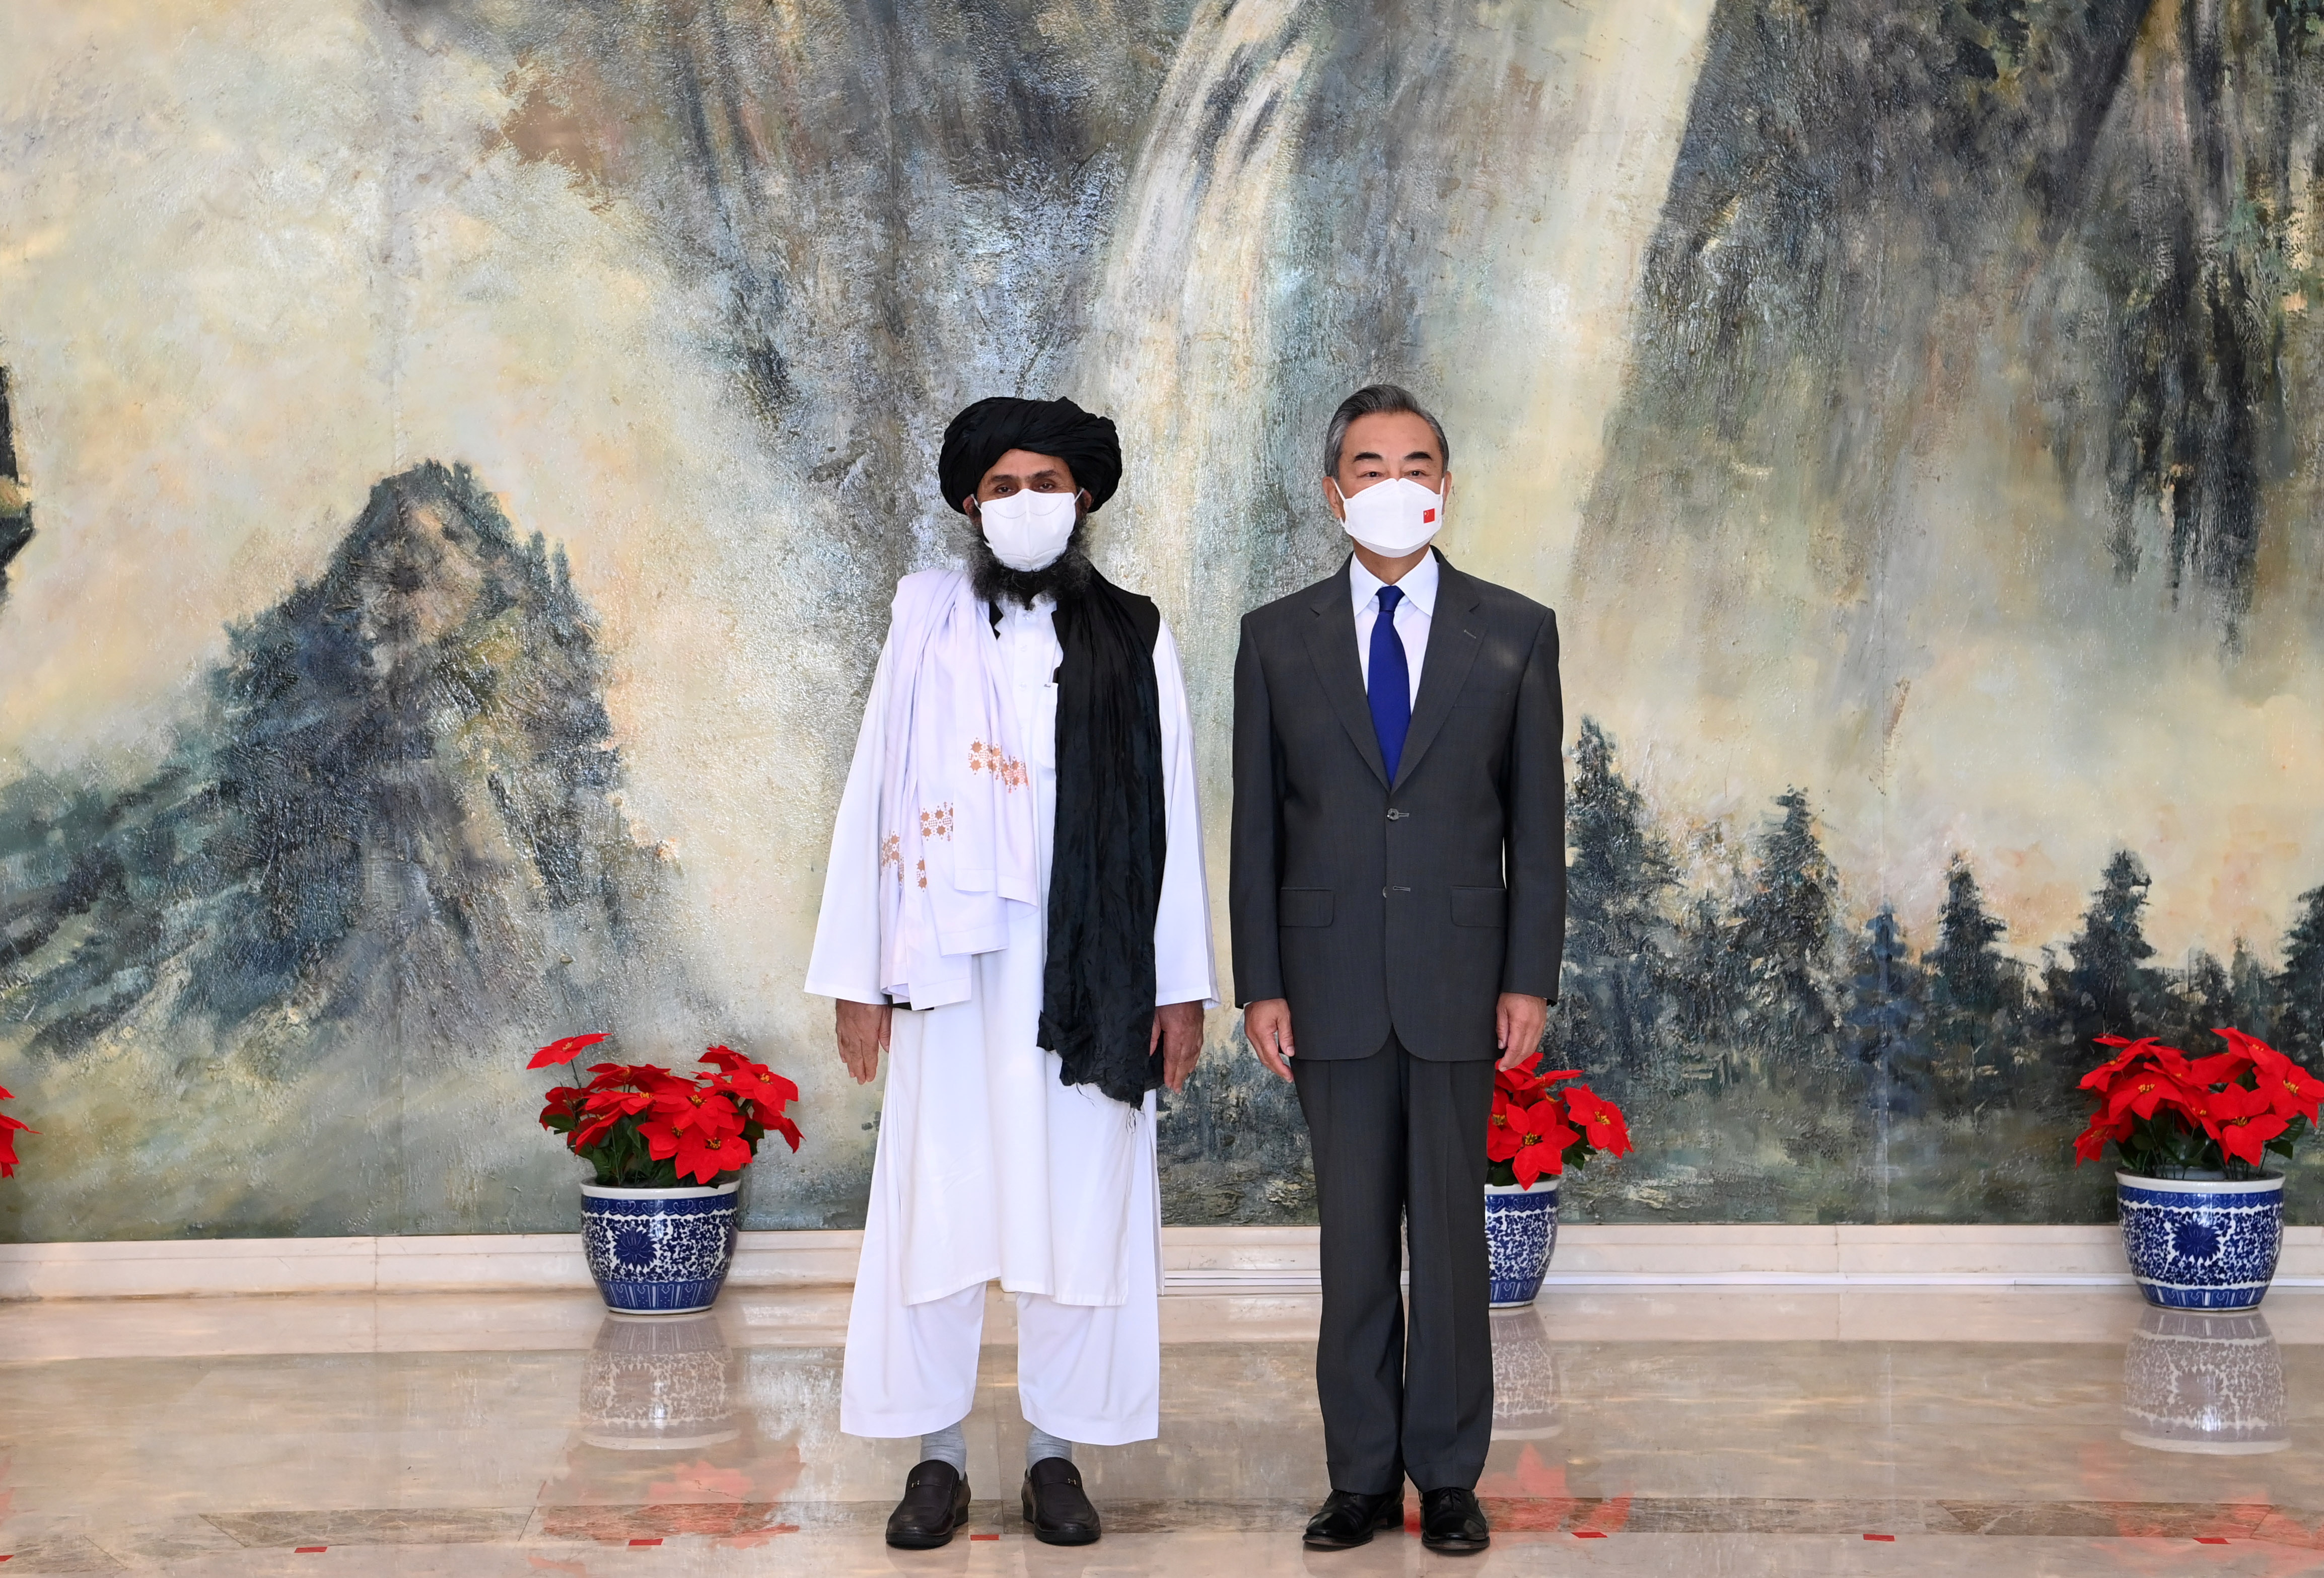 Chinese State Councilor and Foreign Minister Wang Yi meets with Mullah Abdul Ghani Baradar, political chief of Afghanistan's Taliban, in Tianjin, China July 28, 2021. Picture taken July 28, 2021. Li Ran/Xinhua via REUTERS